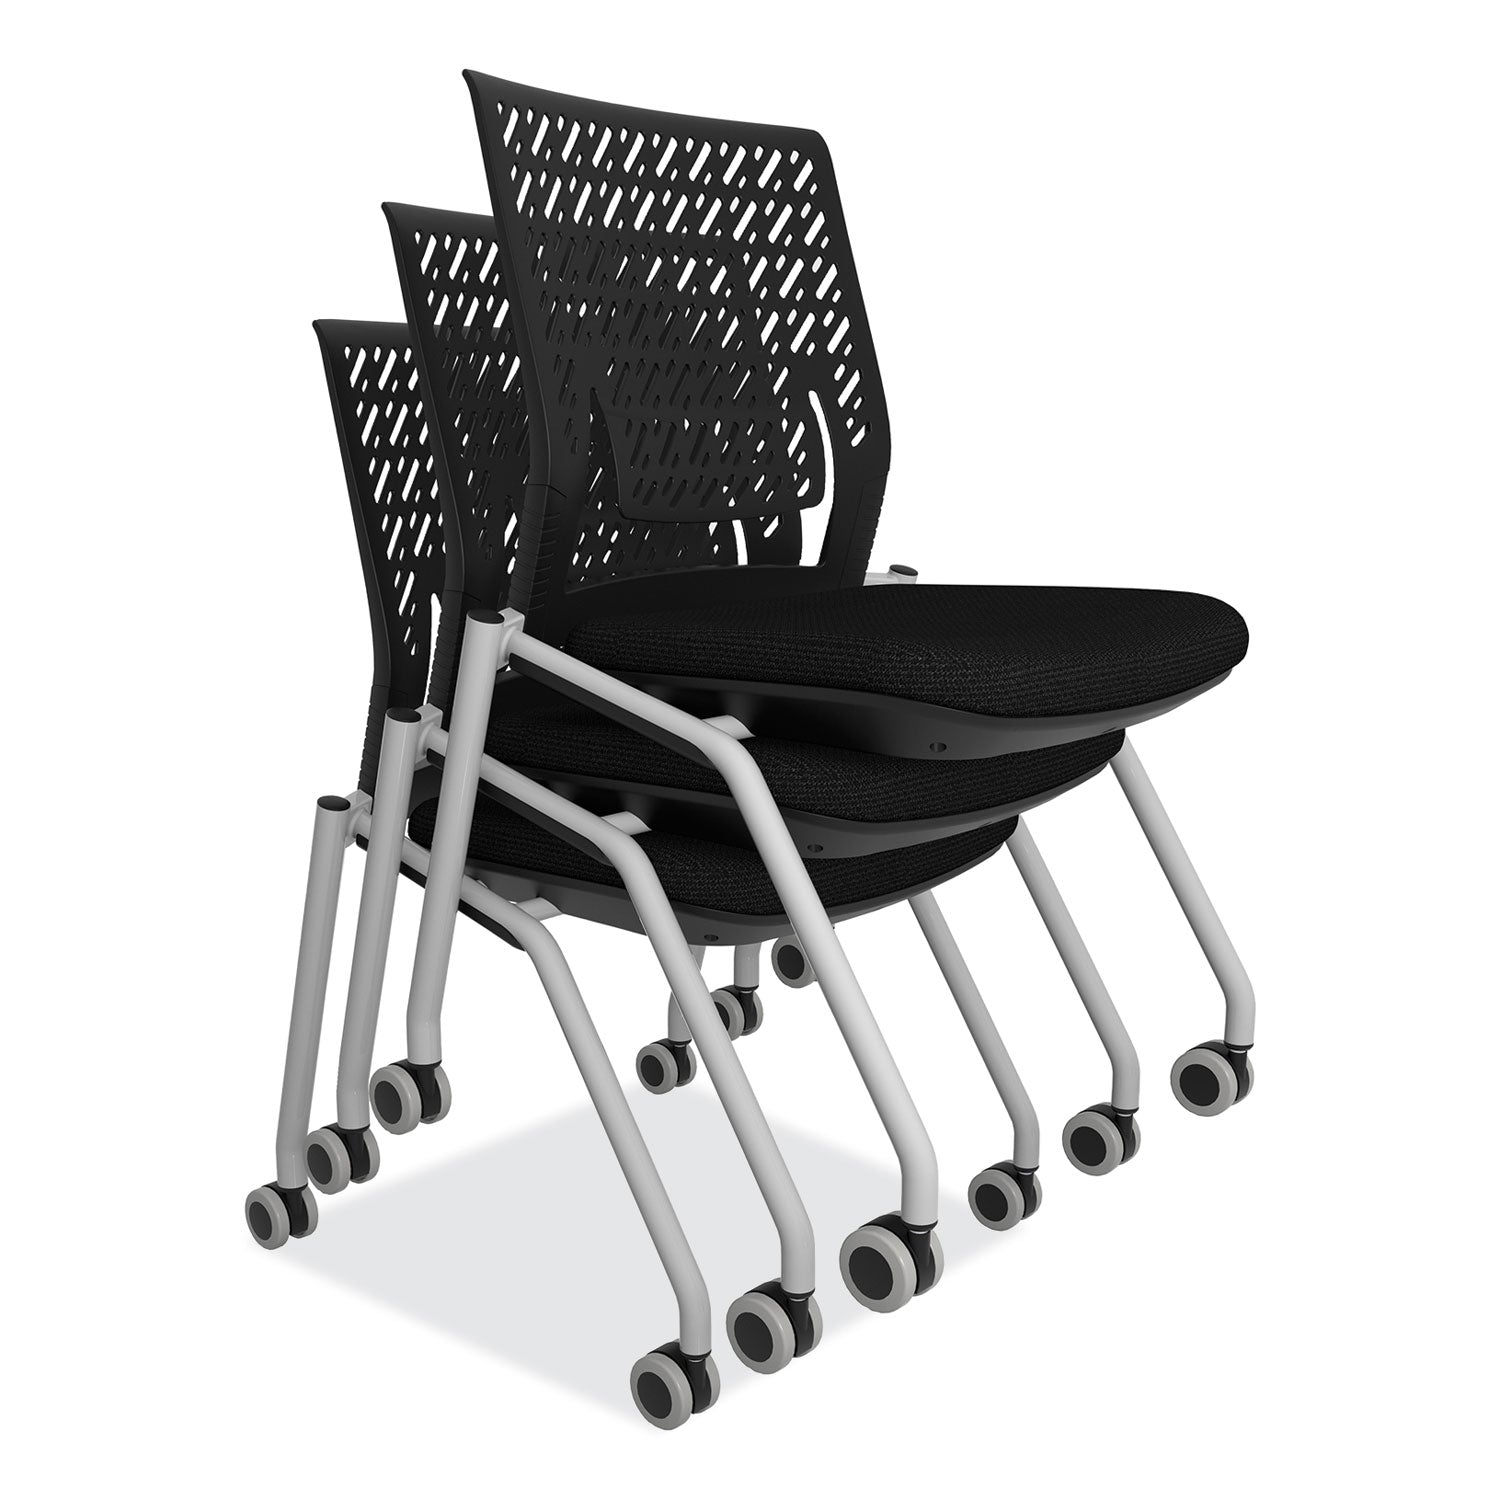 thesis-training-chair-w-flex-back-support-up-to-250-lb-18-high-black-seat-gray-base-2-carton-ships-in-1-3-business-days_safktx2sbblk - 2